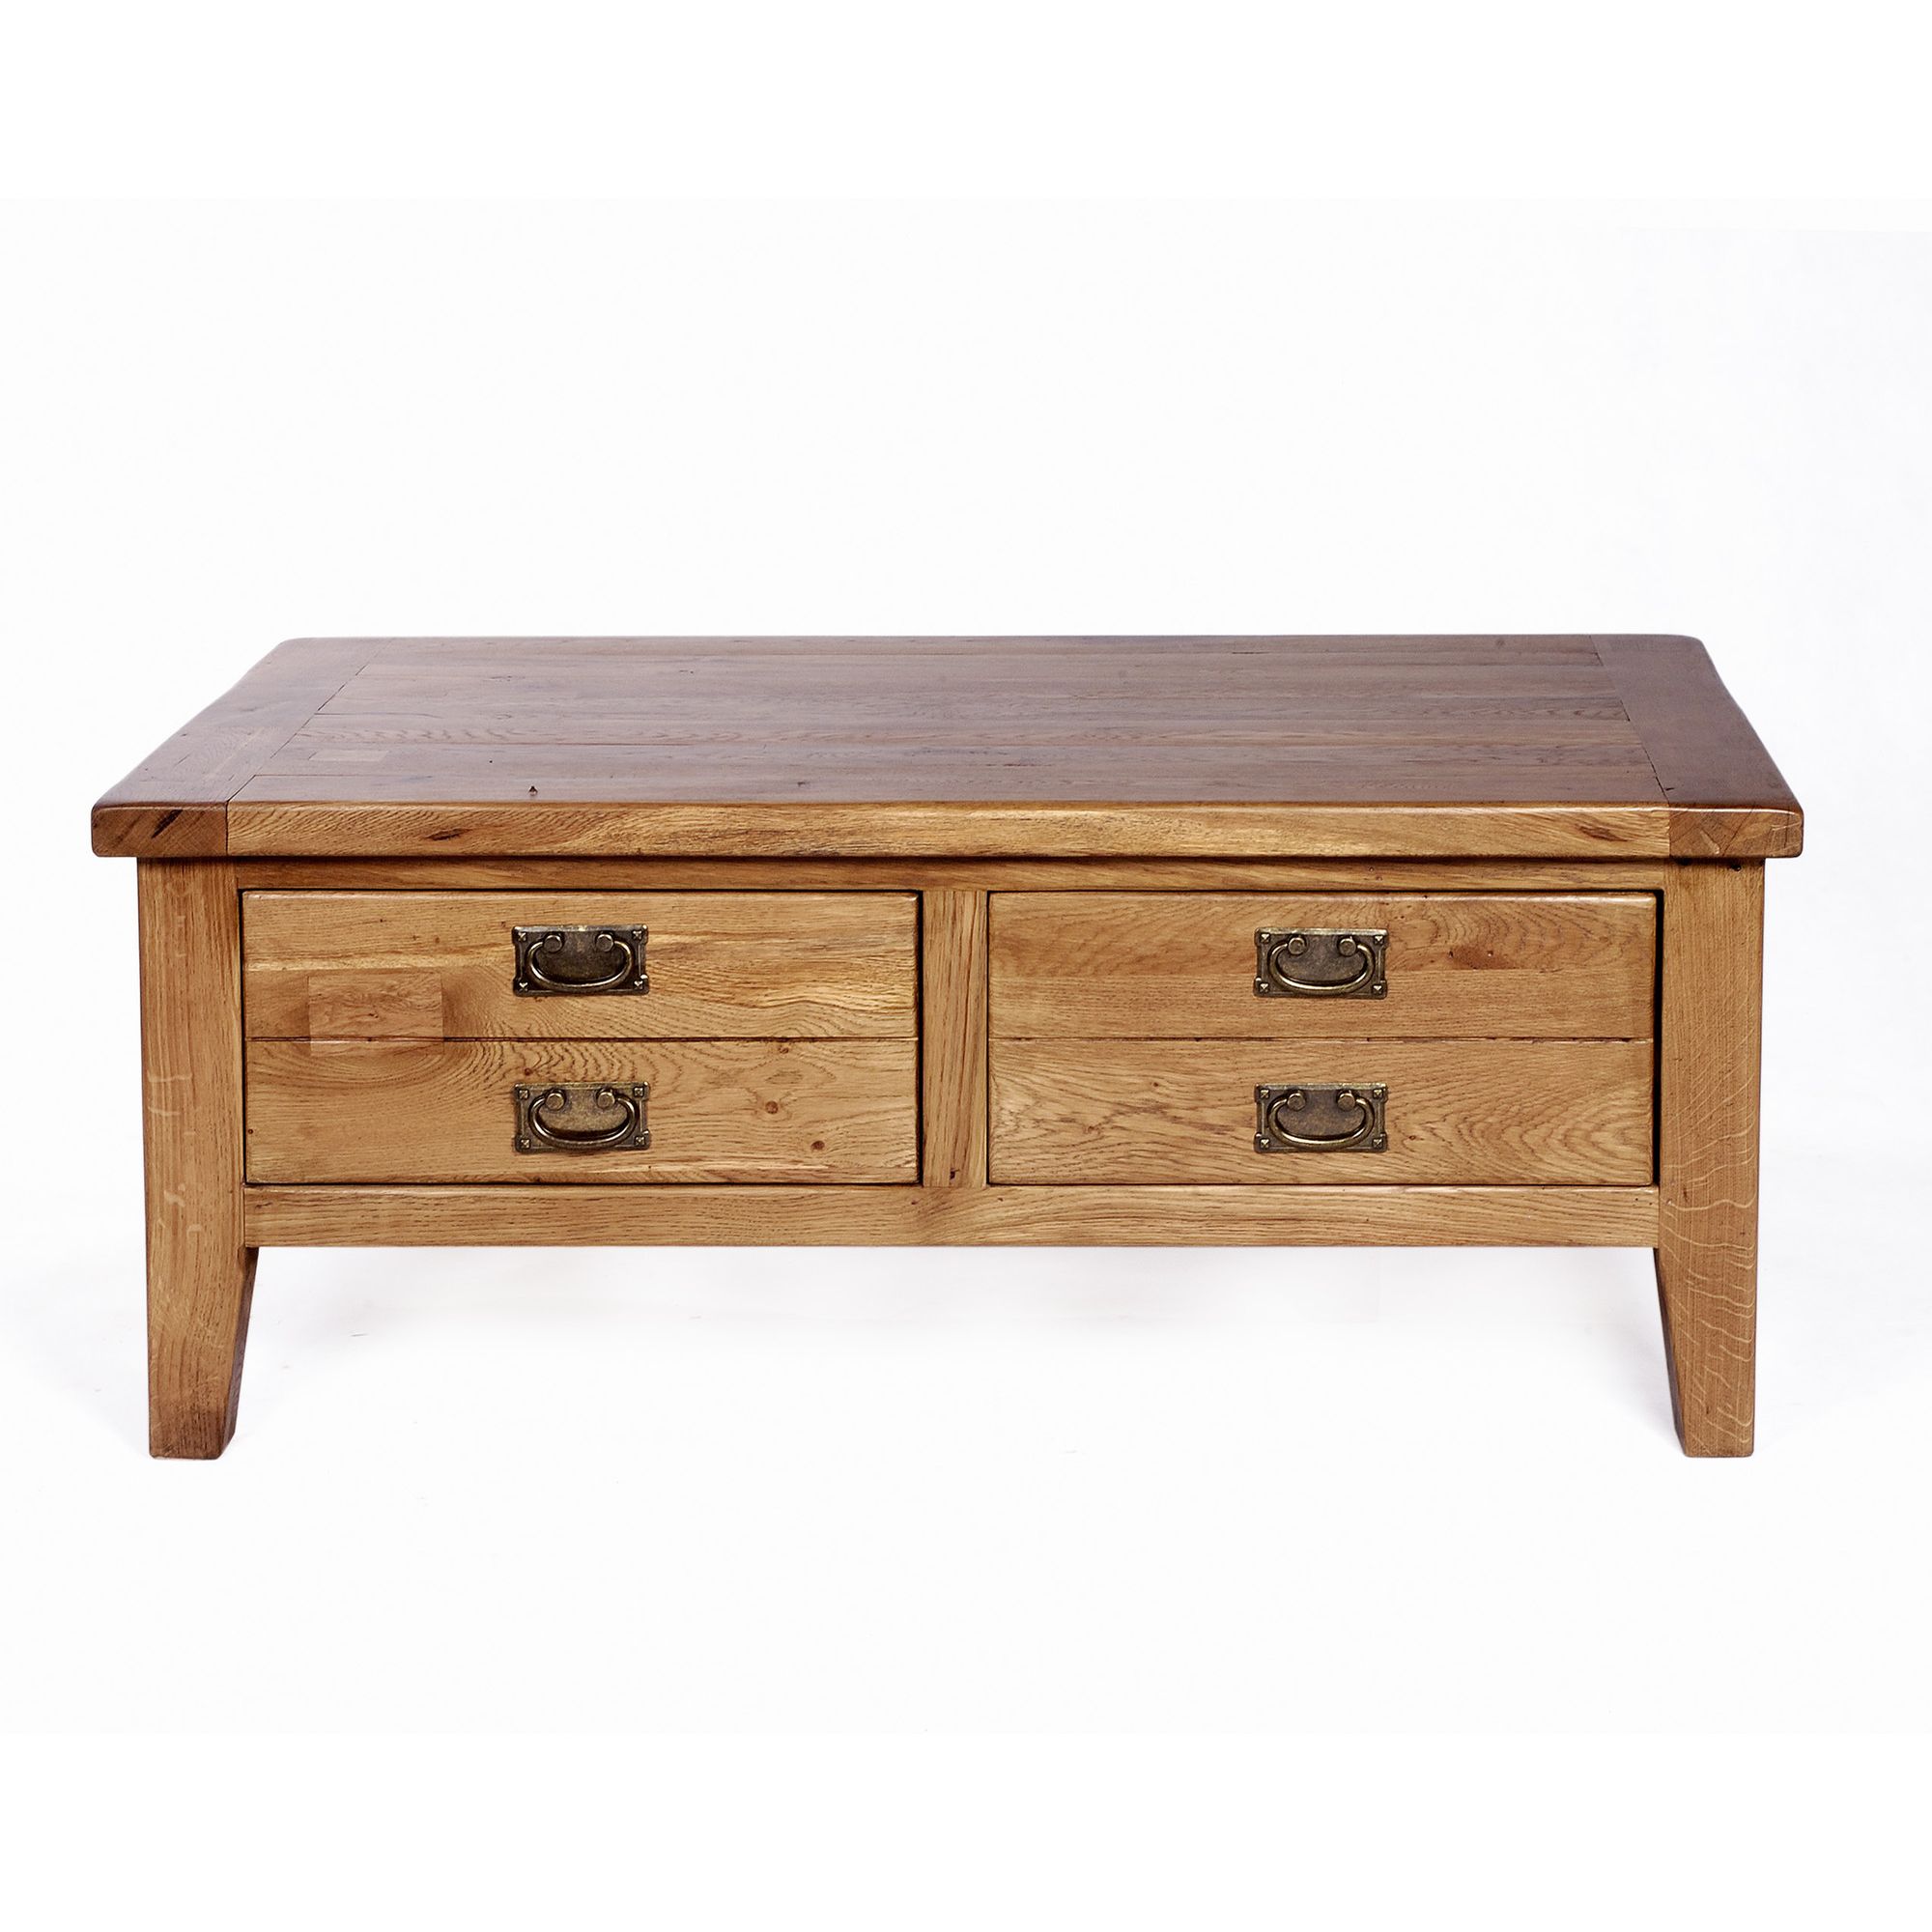 Wiseaction Florence Coffee Table at Tesco Direct